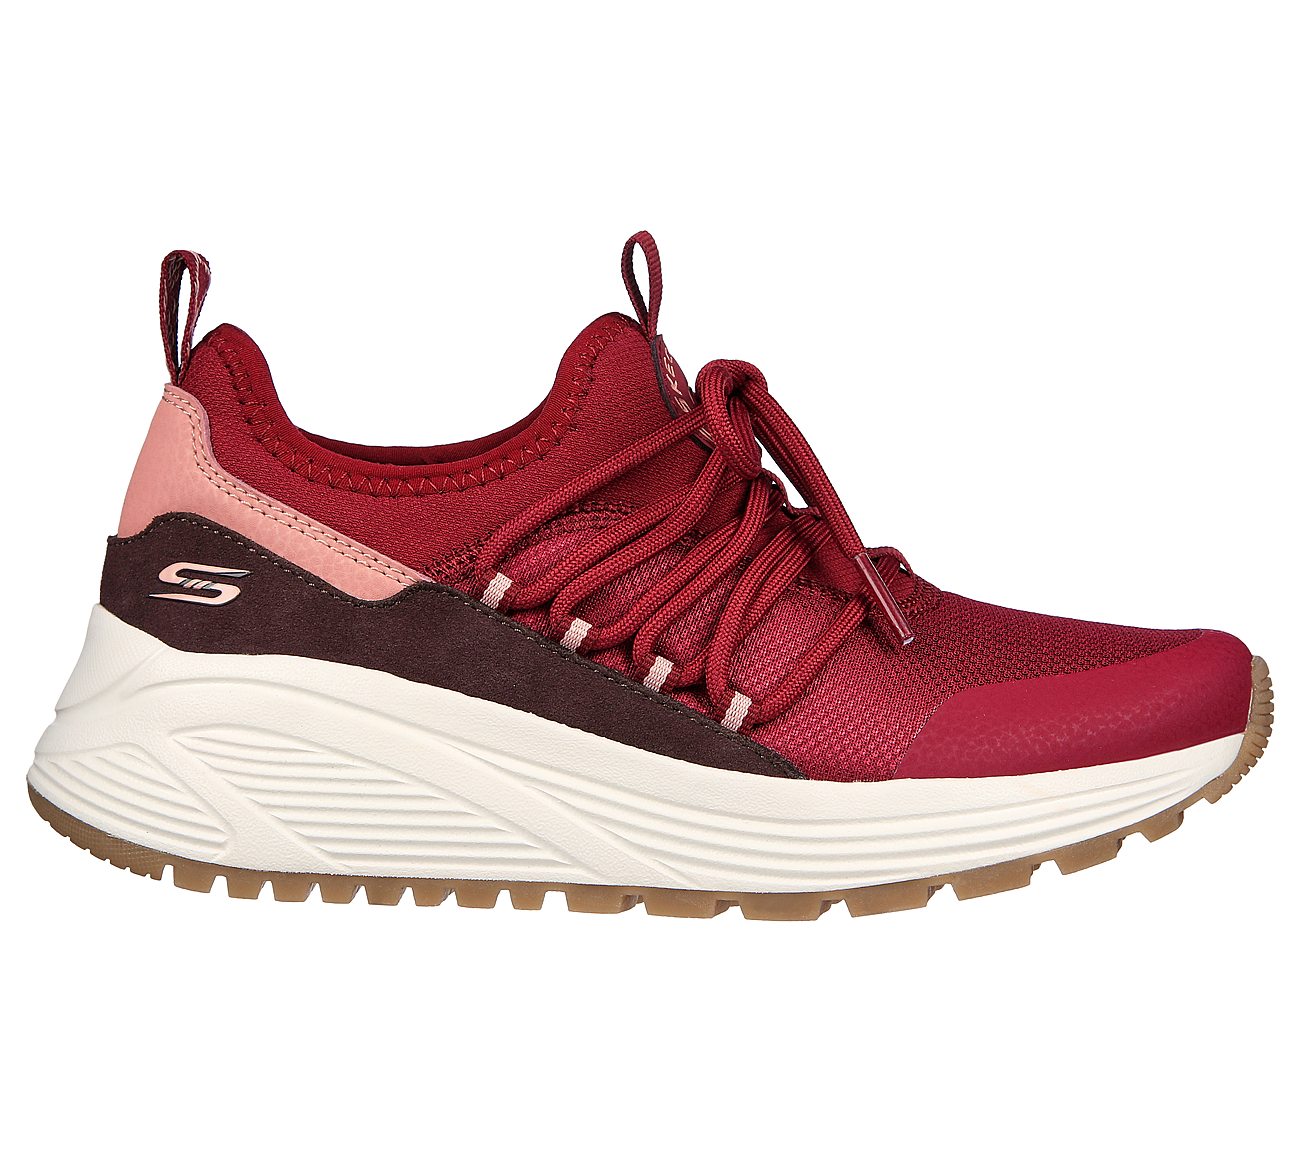 BOBS SPARROW 2.0-SONIC LUV, BBURGUNDY Footwear Lateral View